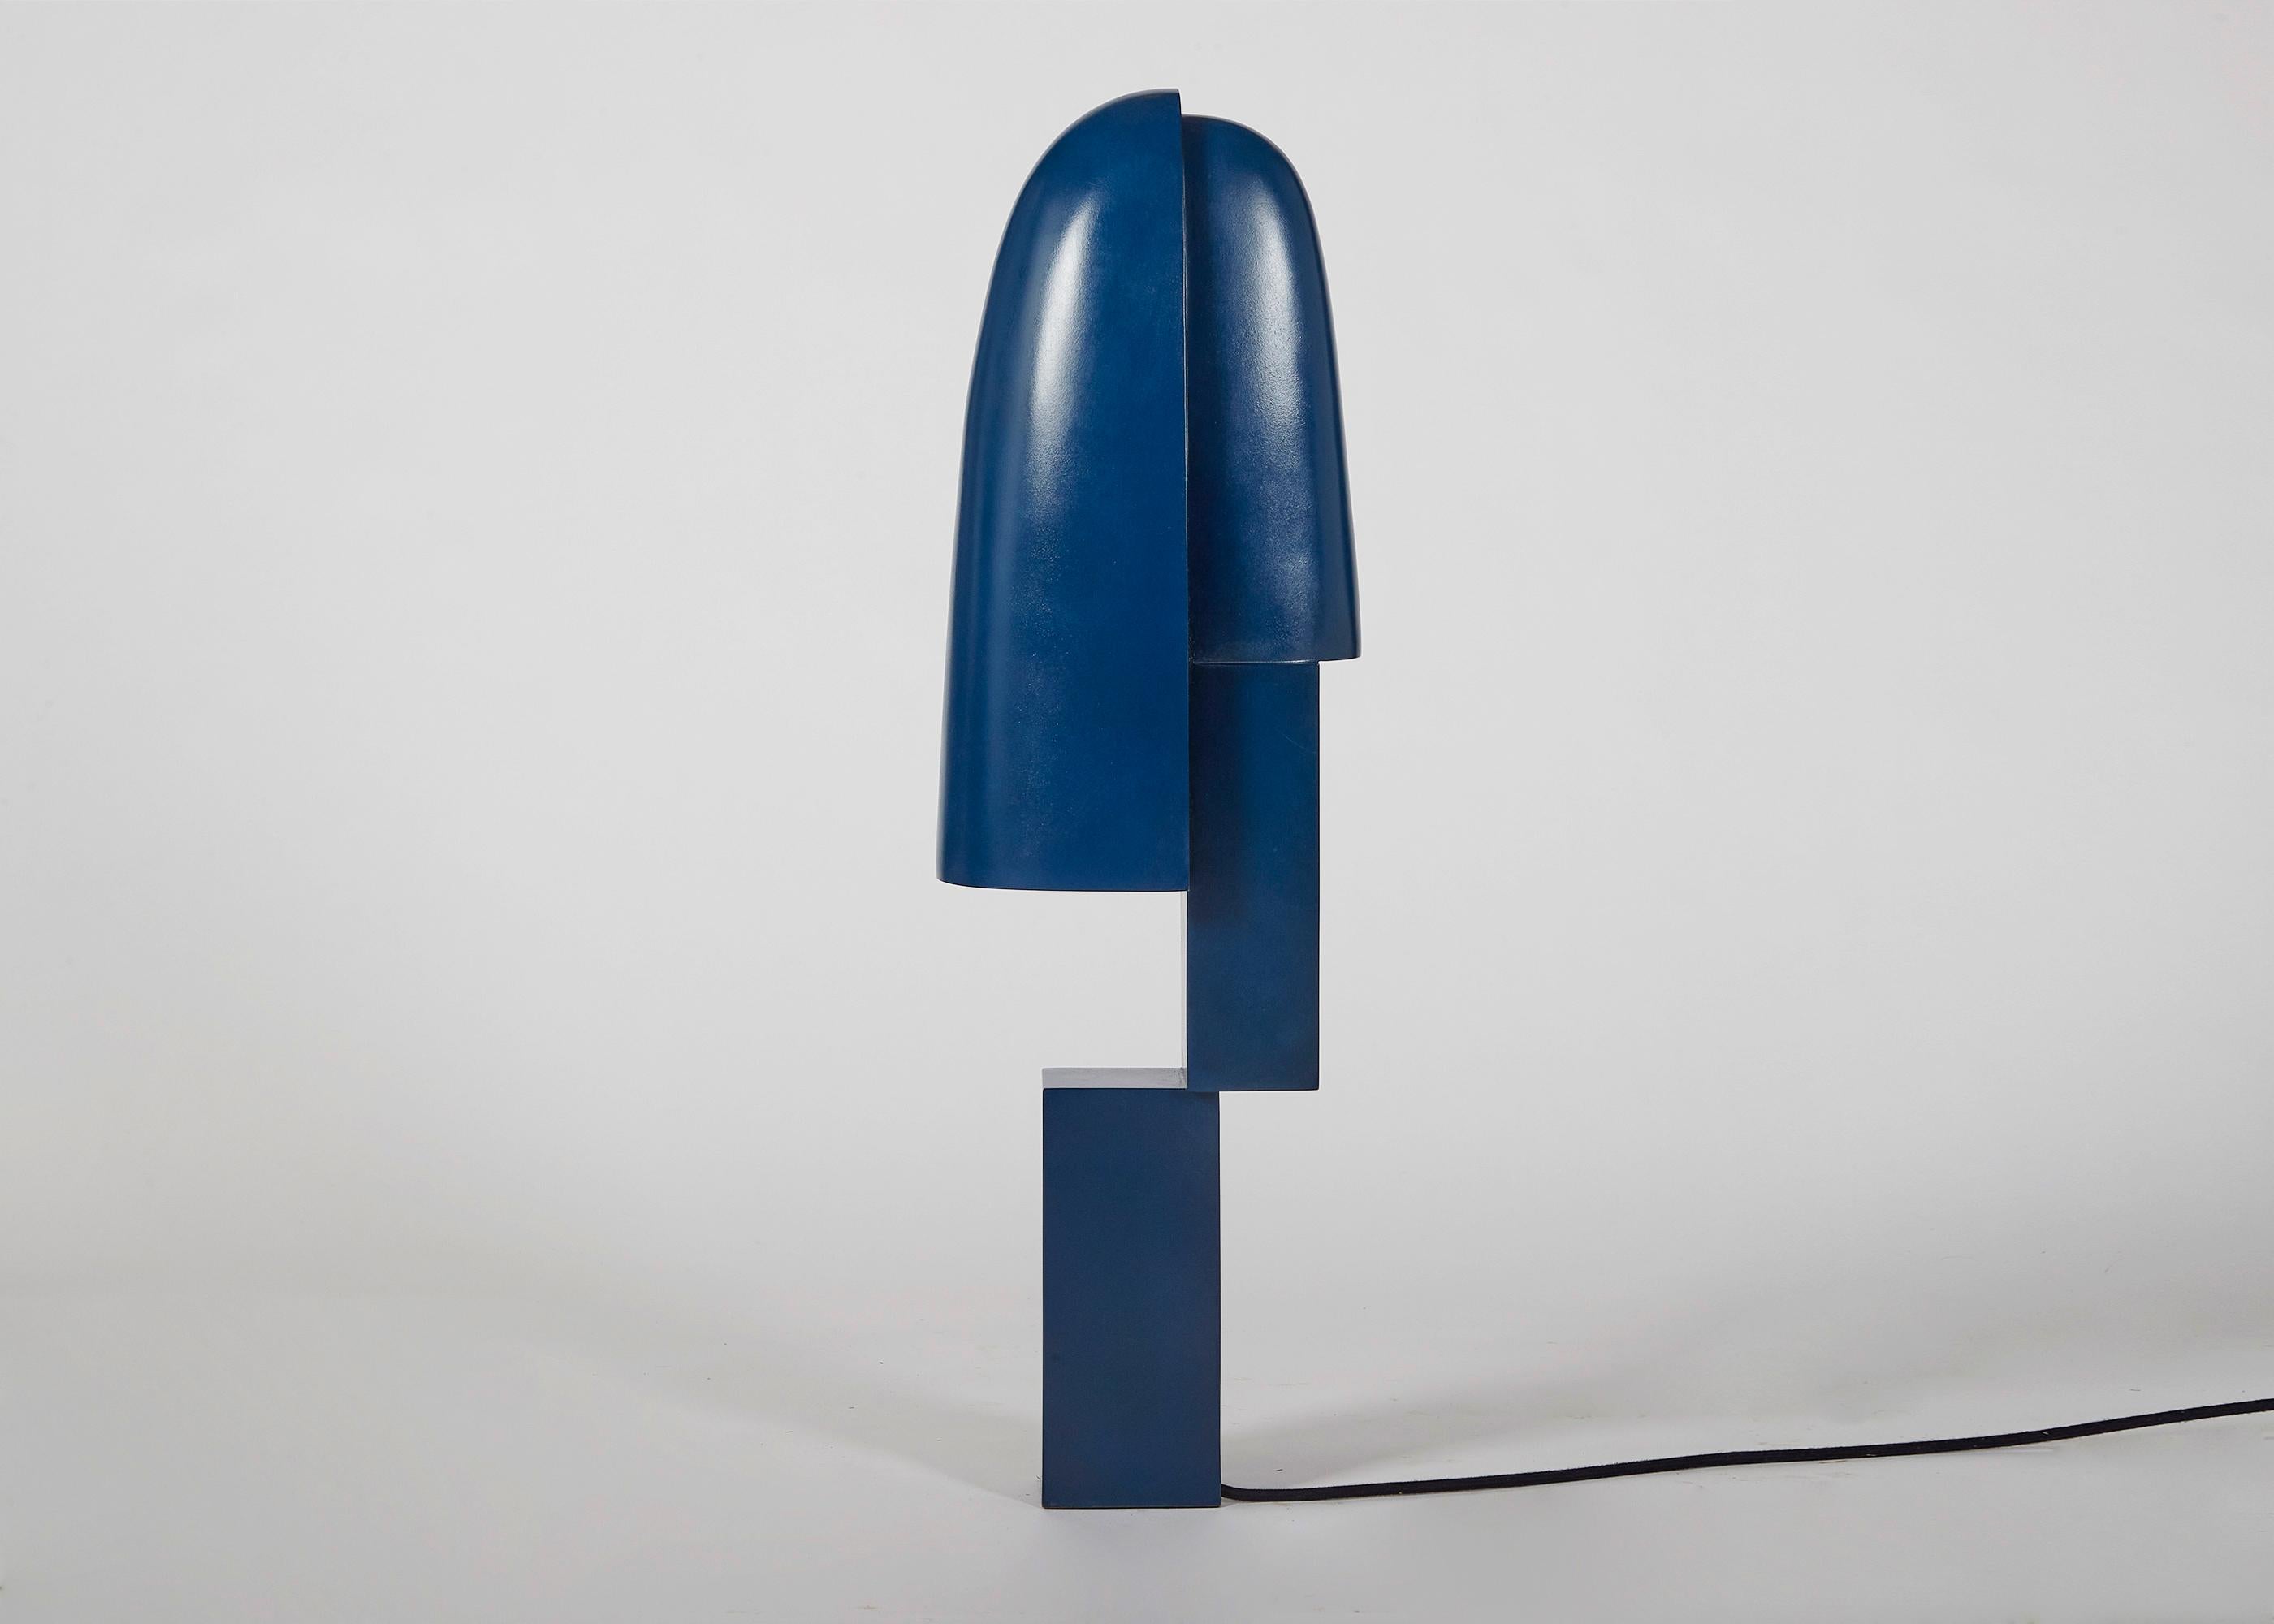 This extraordinary light sculpture, one of a series of strikingly beautiful
pieces in blue patina, marks yet another departure for the groundbreaking
Irish artist and designer, furthering an aesthetic language inspired by the
famed Broighter